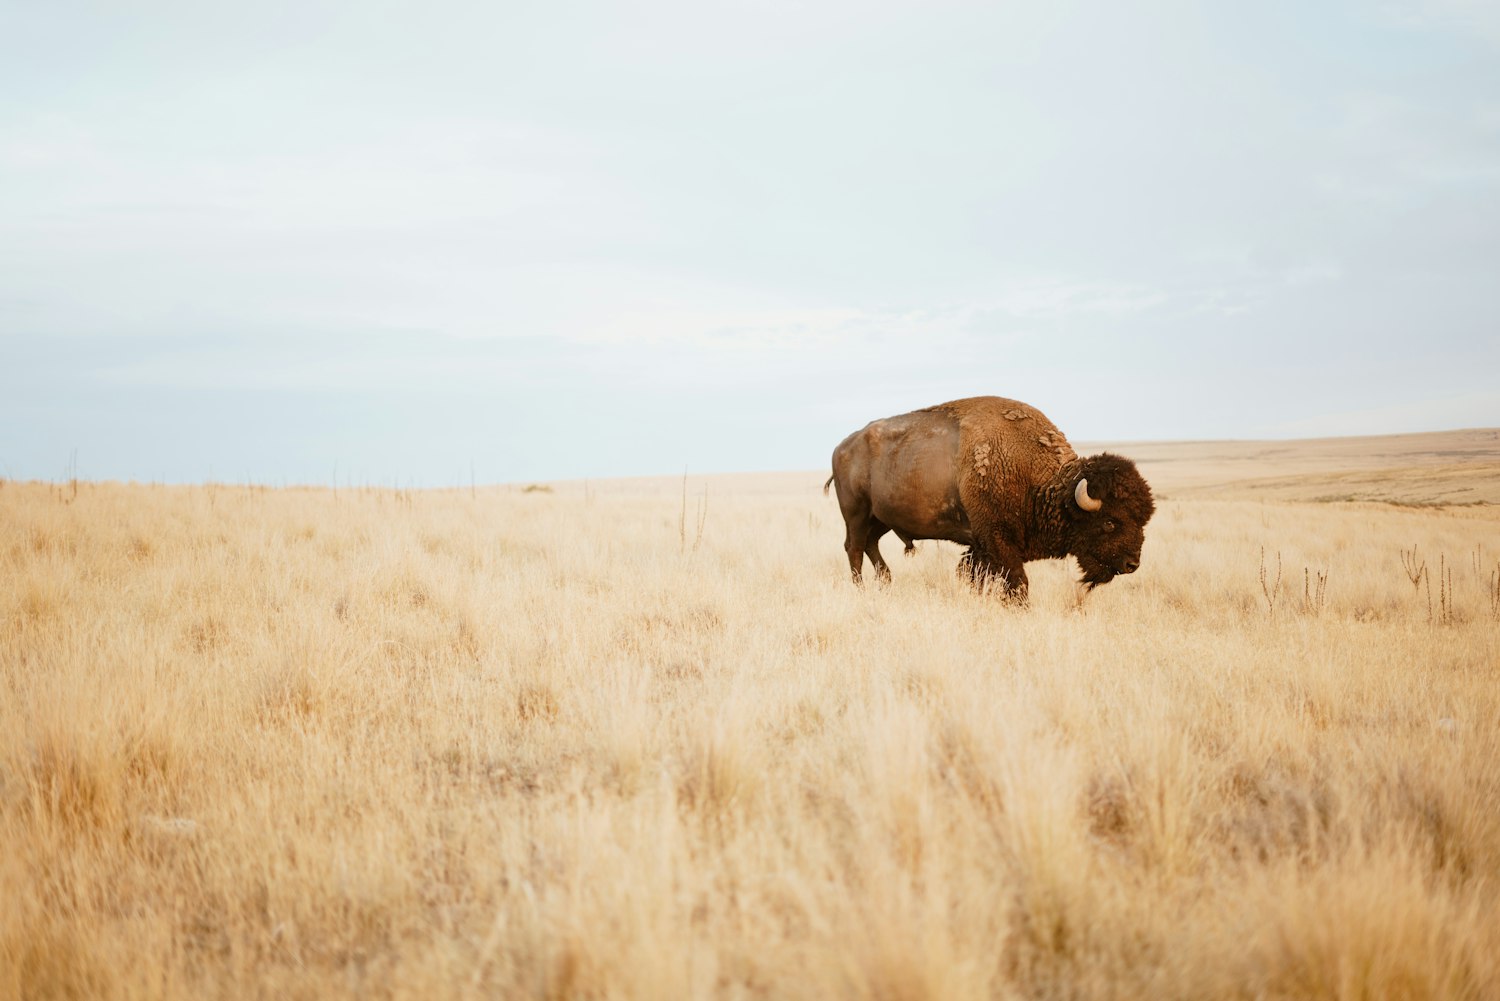 Documents Detail Push To Manage Yellowstone Bison as Cattle